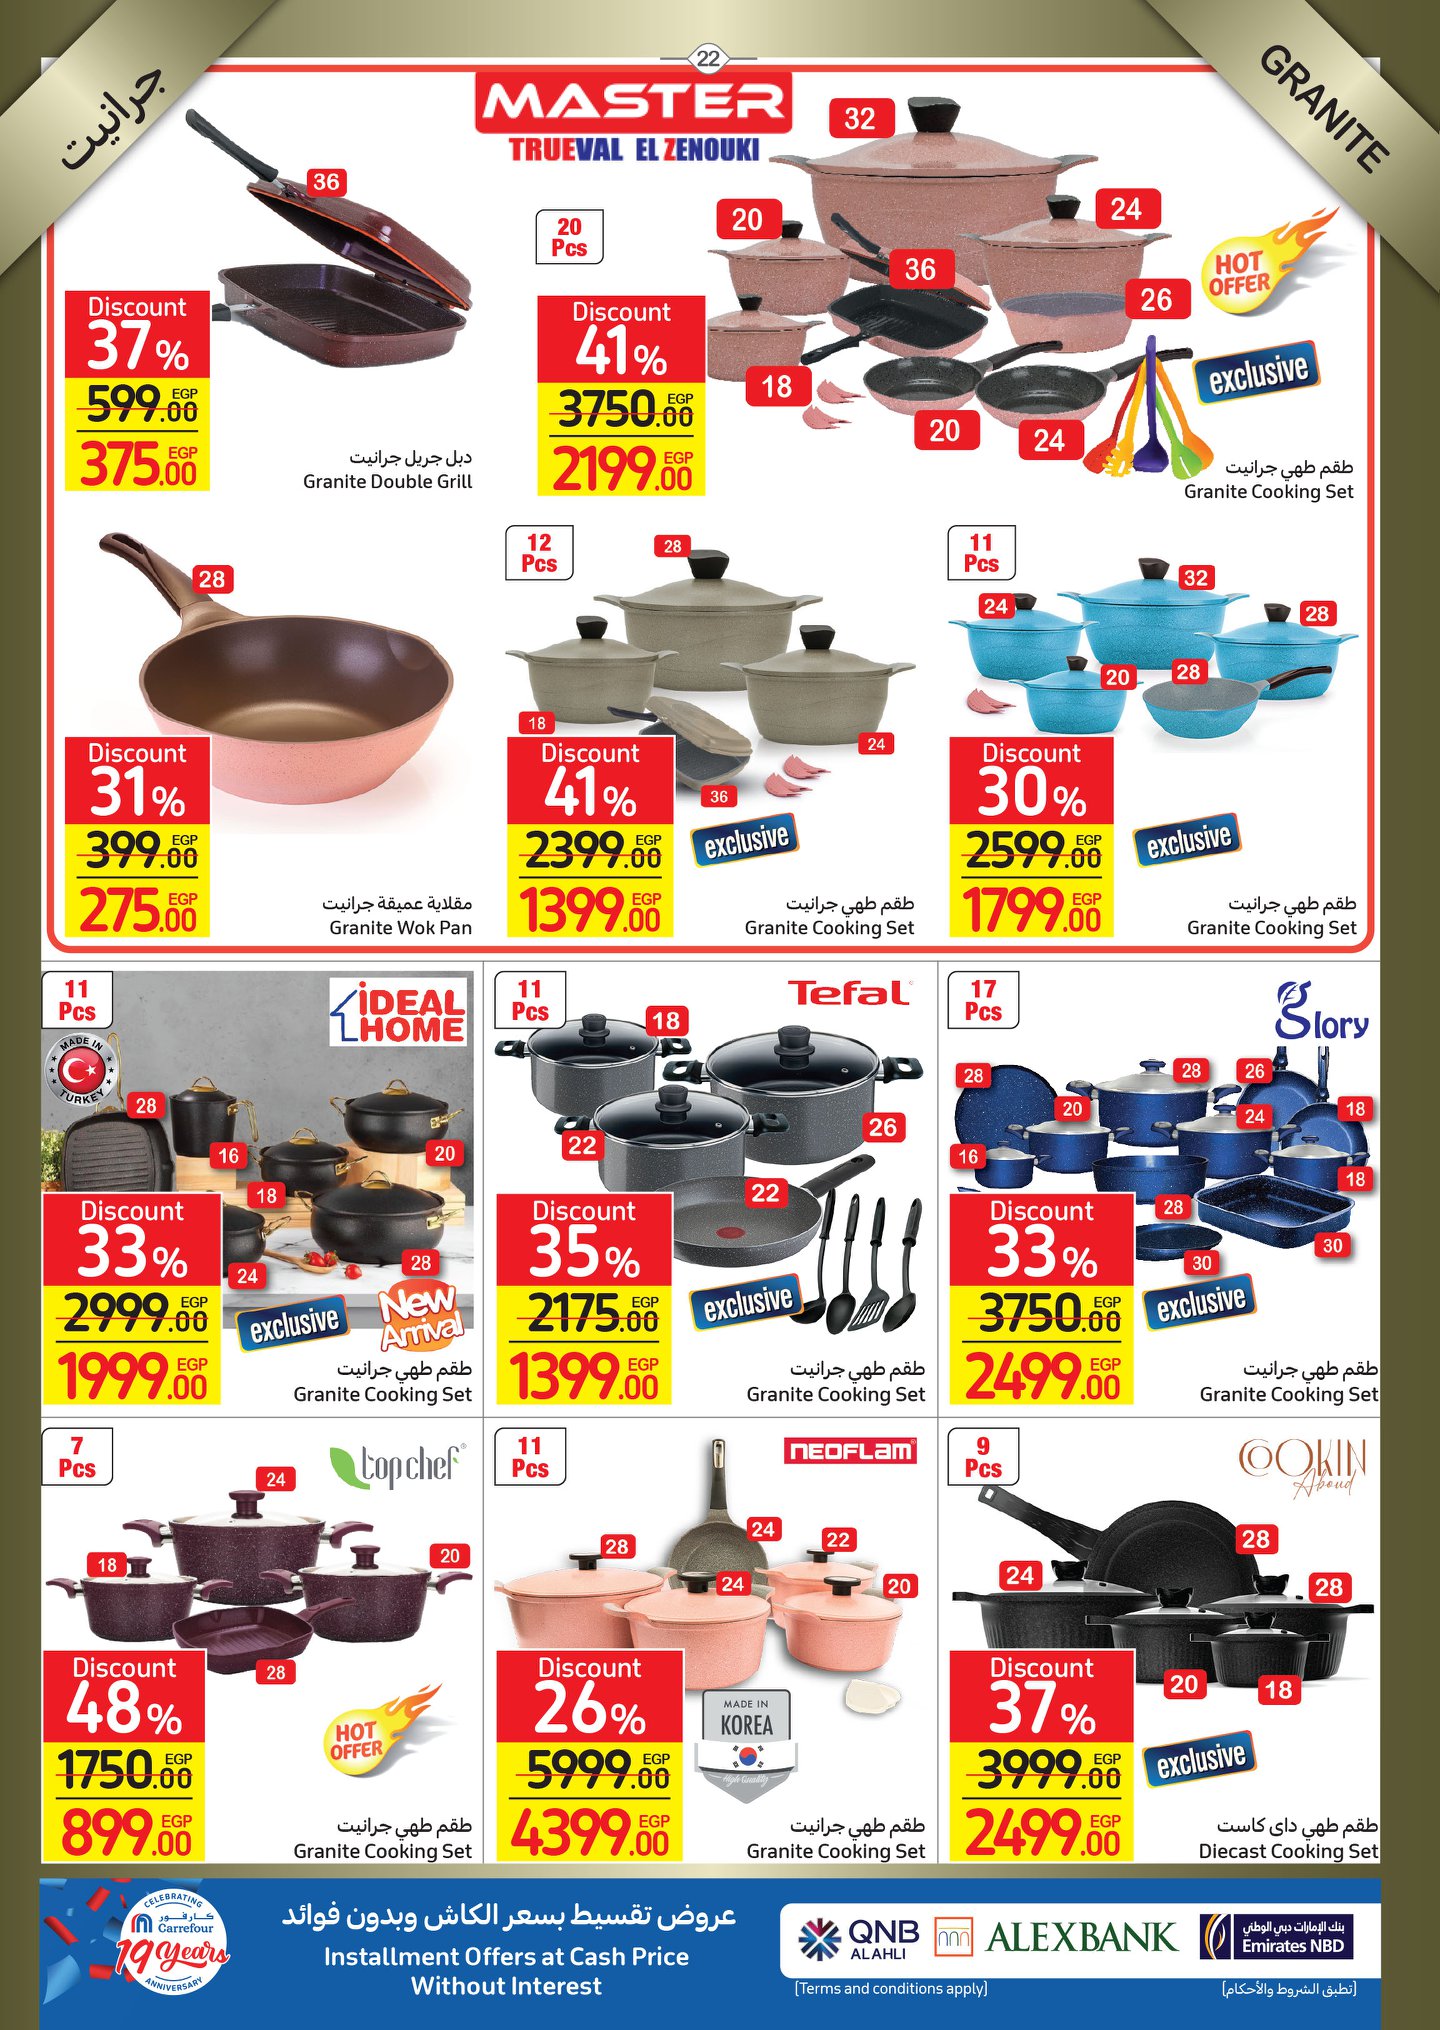 Carrefour magazine offers complete with 50% discounts and a surprise purchase in convenient installments without interest 27